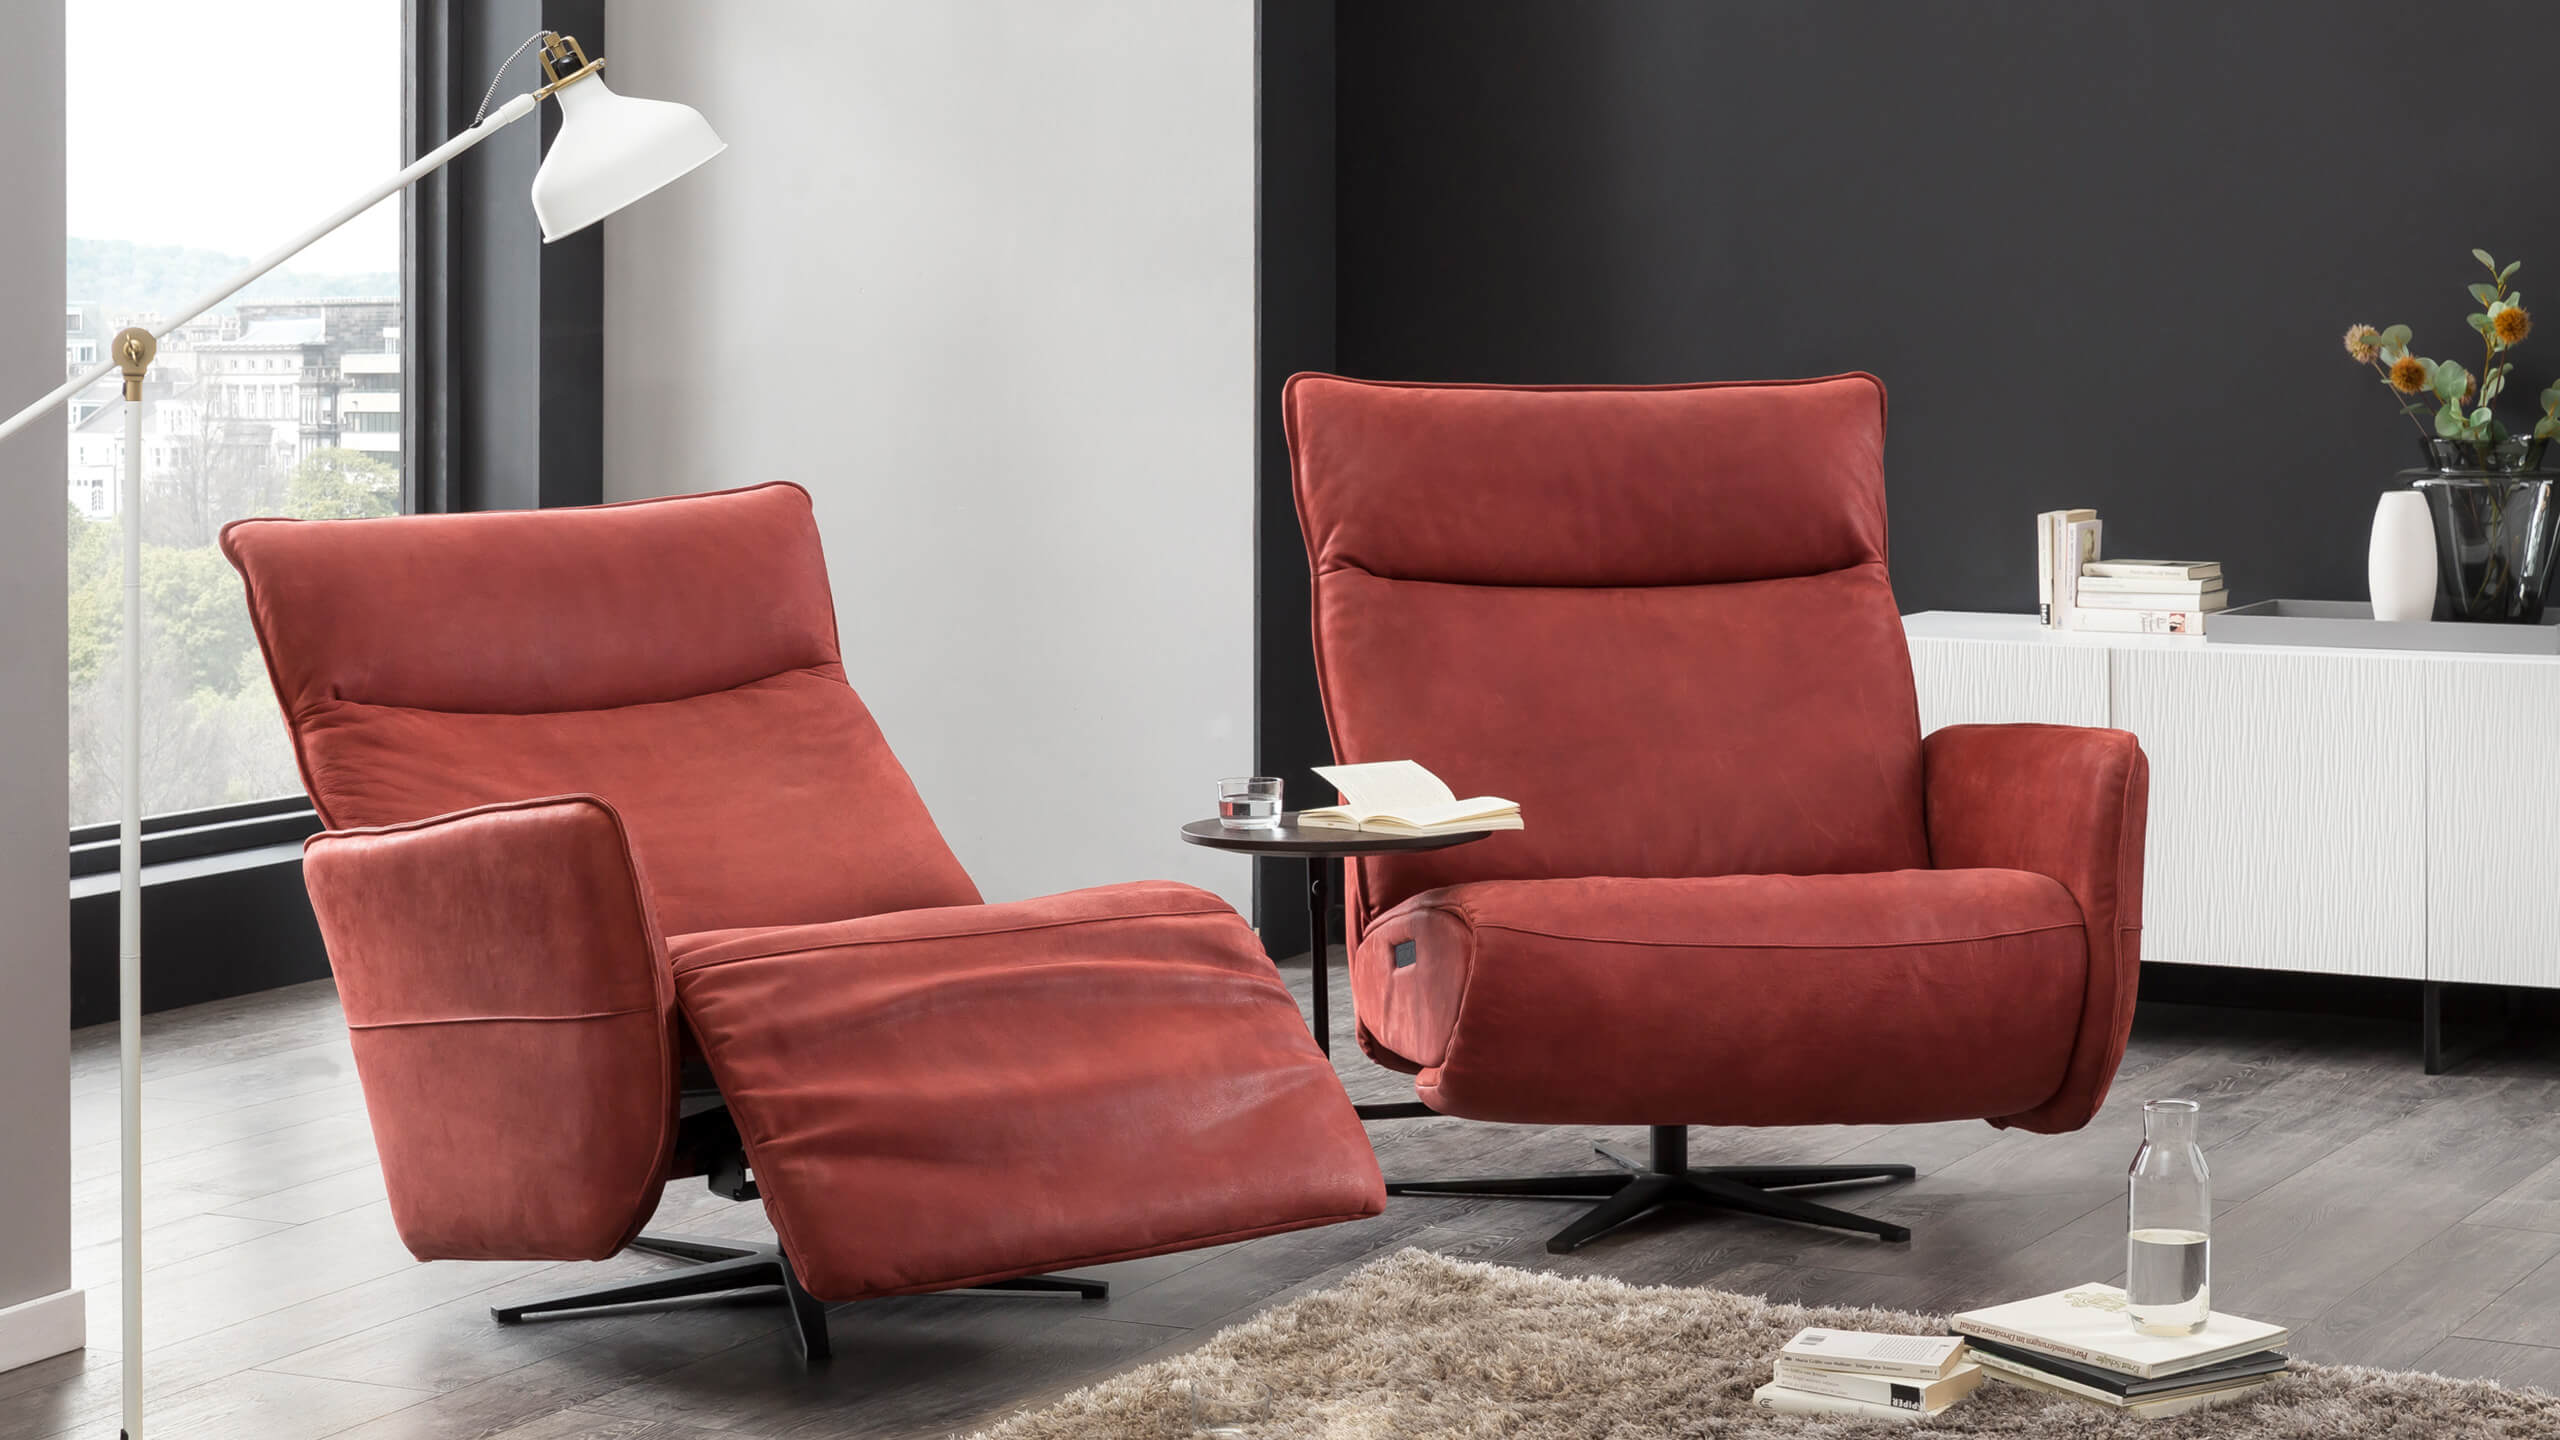 Lounger Sessel Duo in Nubukleder rot mit Funktion